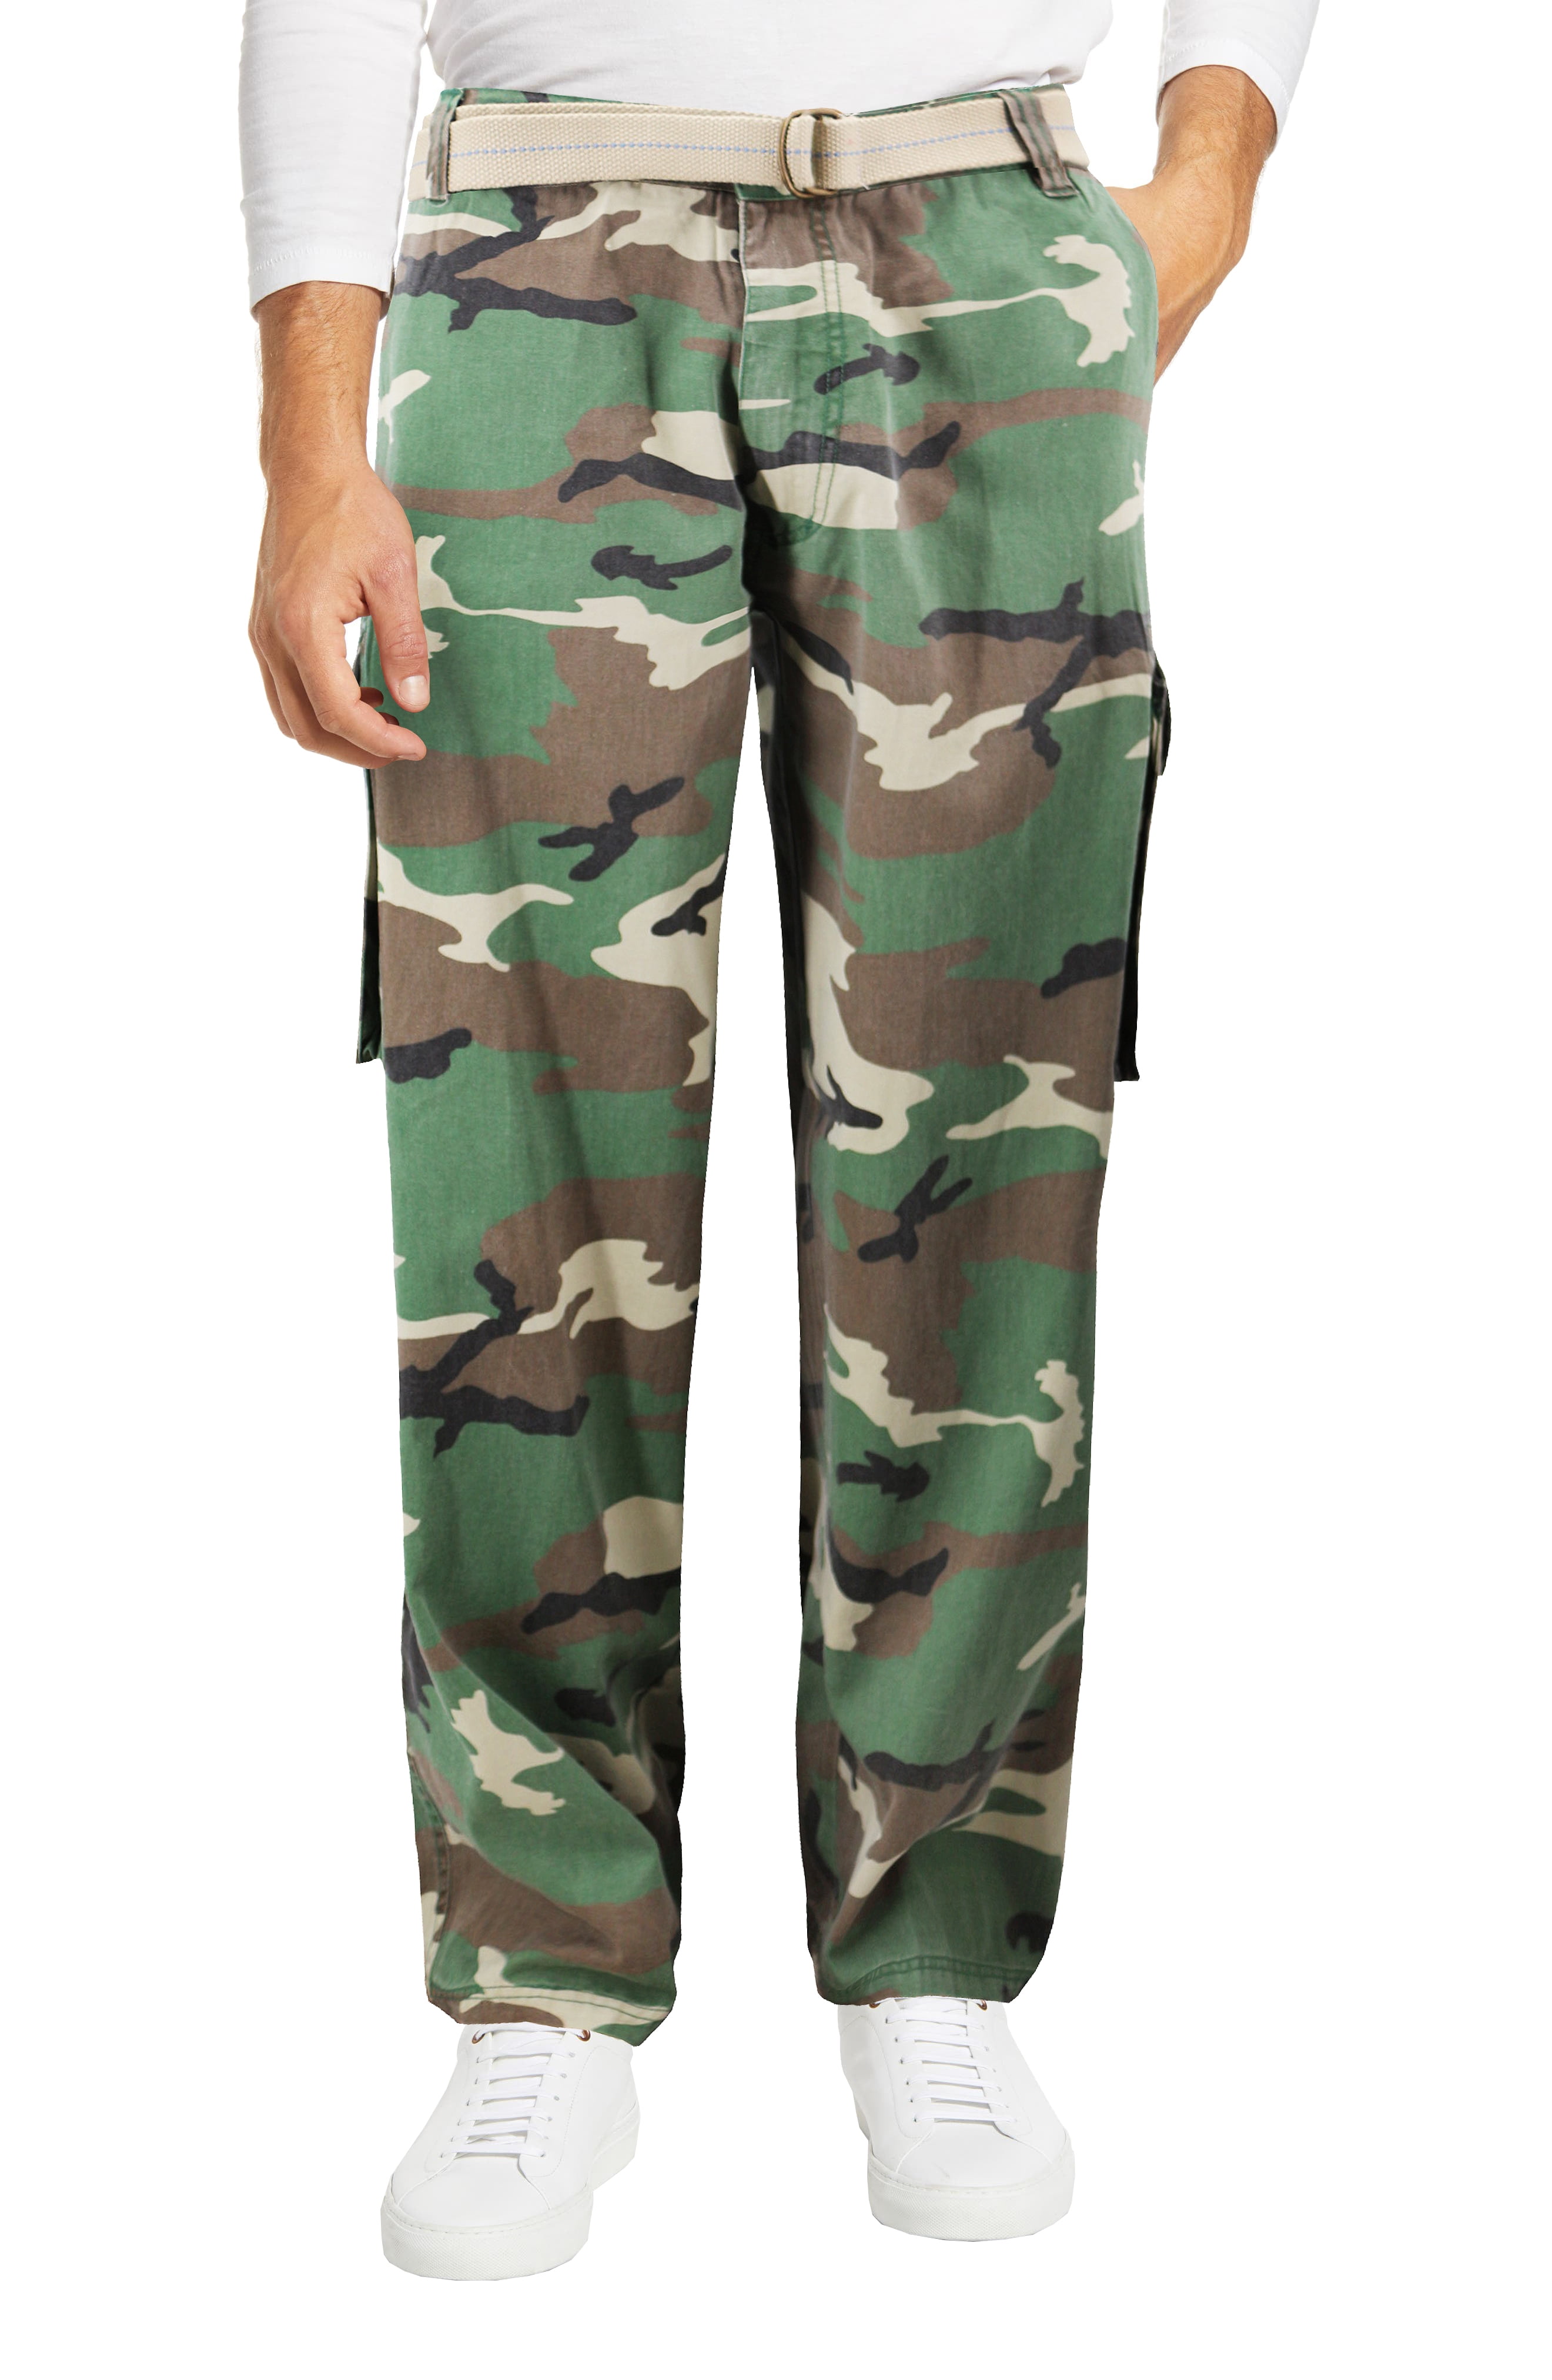 Mens Casual Trousers Camouflage Cargo Pants Army Fatigue Tactical Combat Pants 